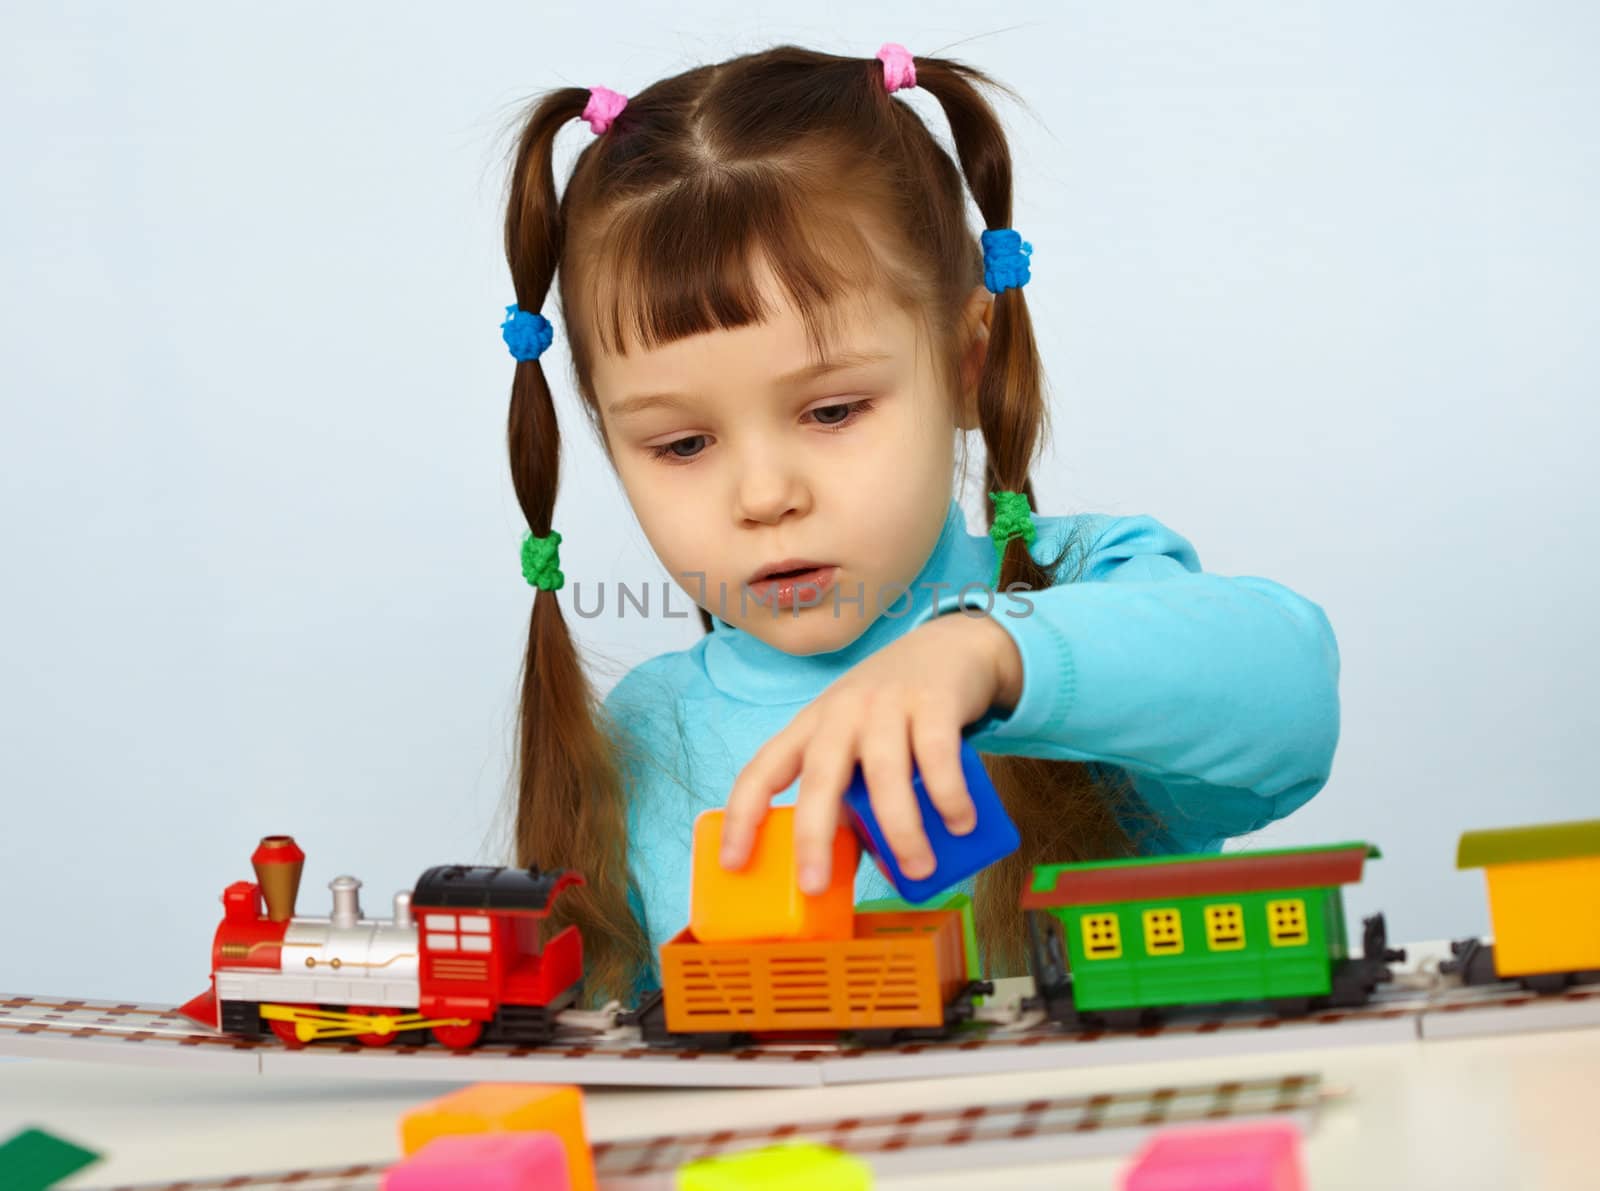 The little girl preschooler playing with a toy railway